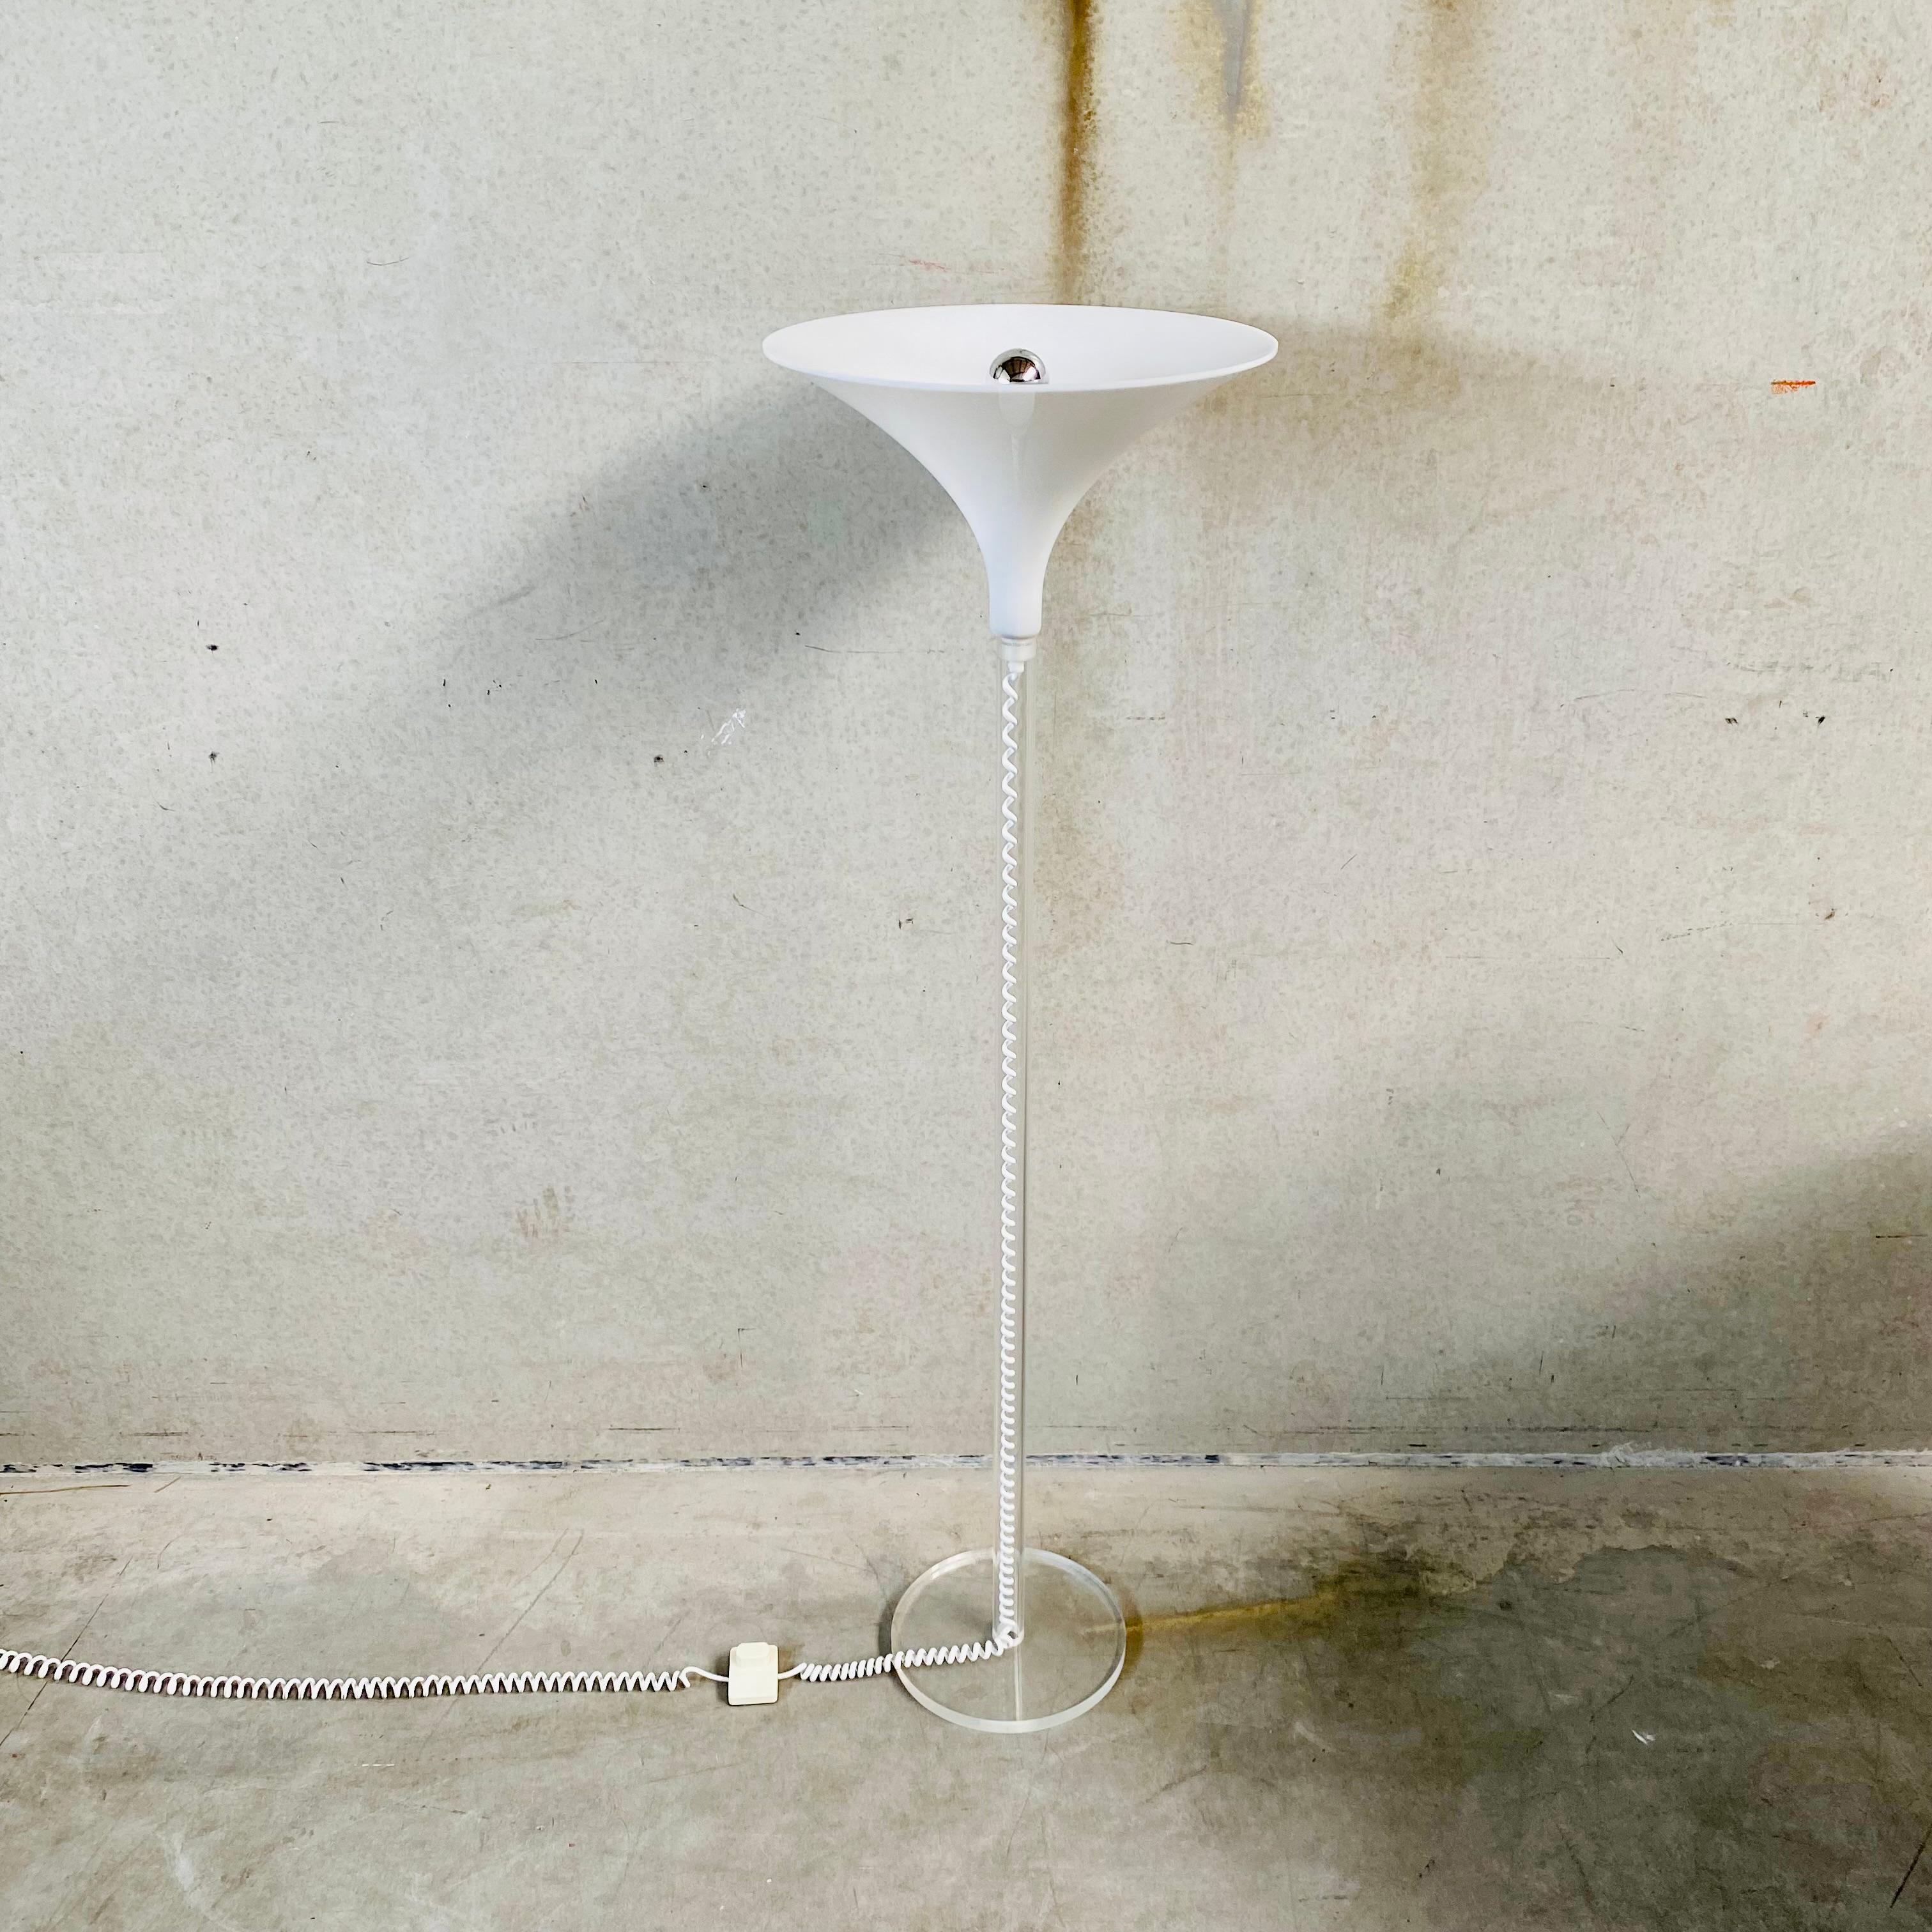 Elegance Redefined: Vintage Harco Loor Lucite Floor Lamp with Twisted Wire Detail

Elevate your interior decor with a piece of design history - the vintage Harco Loor Lucite floor lamp. Crafted in the illustrious year 1980, this lamp seamlessly